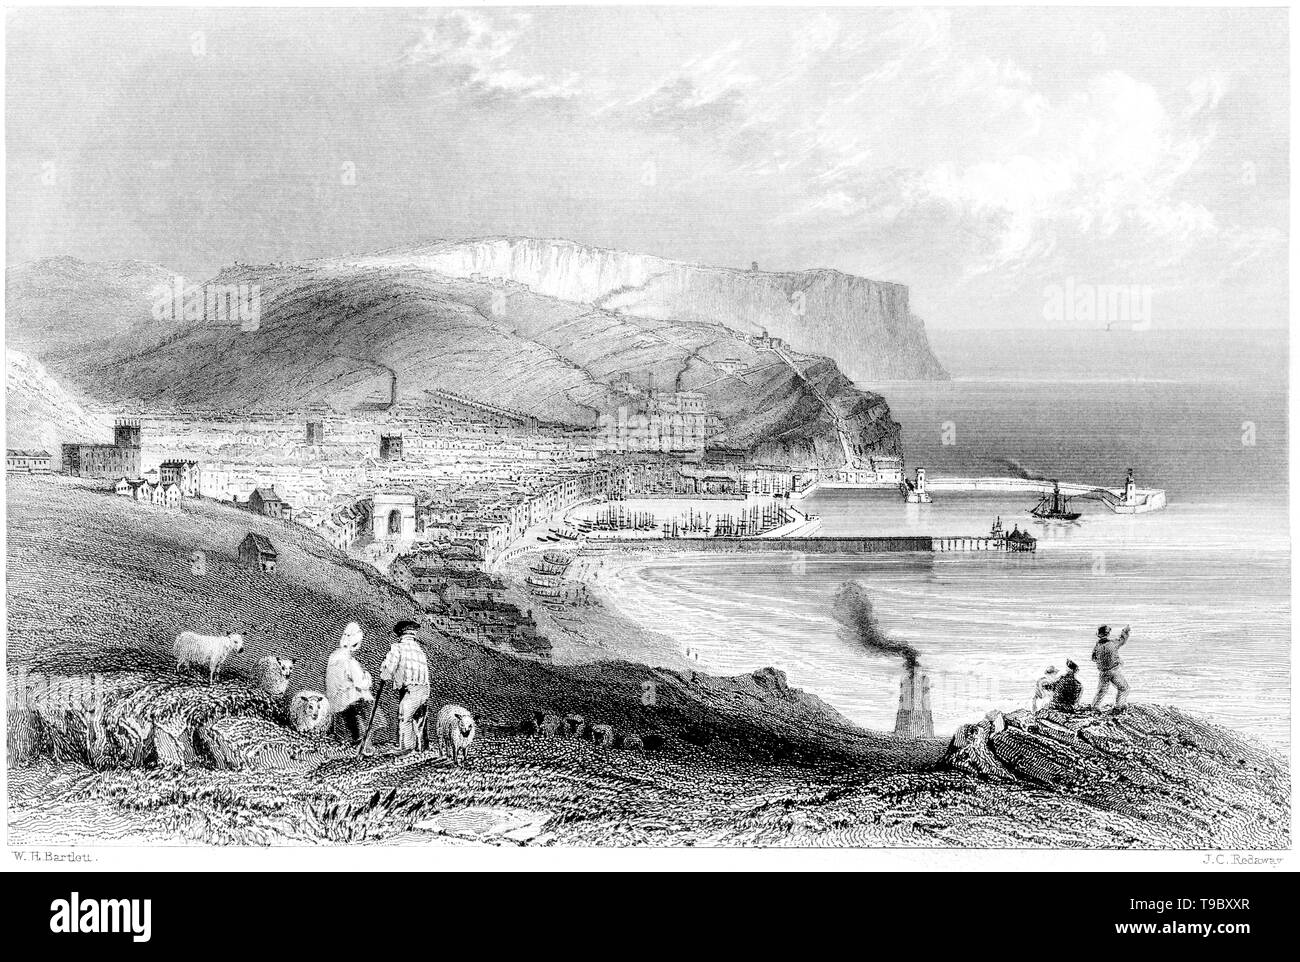 An engraving of Whitehaven with St Bees Head, Cumberland scanned at high resolution from a book published in 1842.  Believed copyright free. Stock Photo